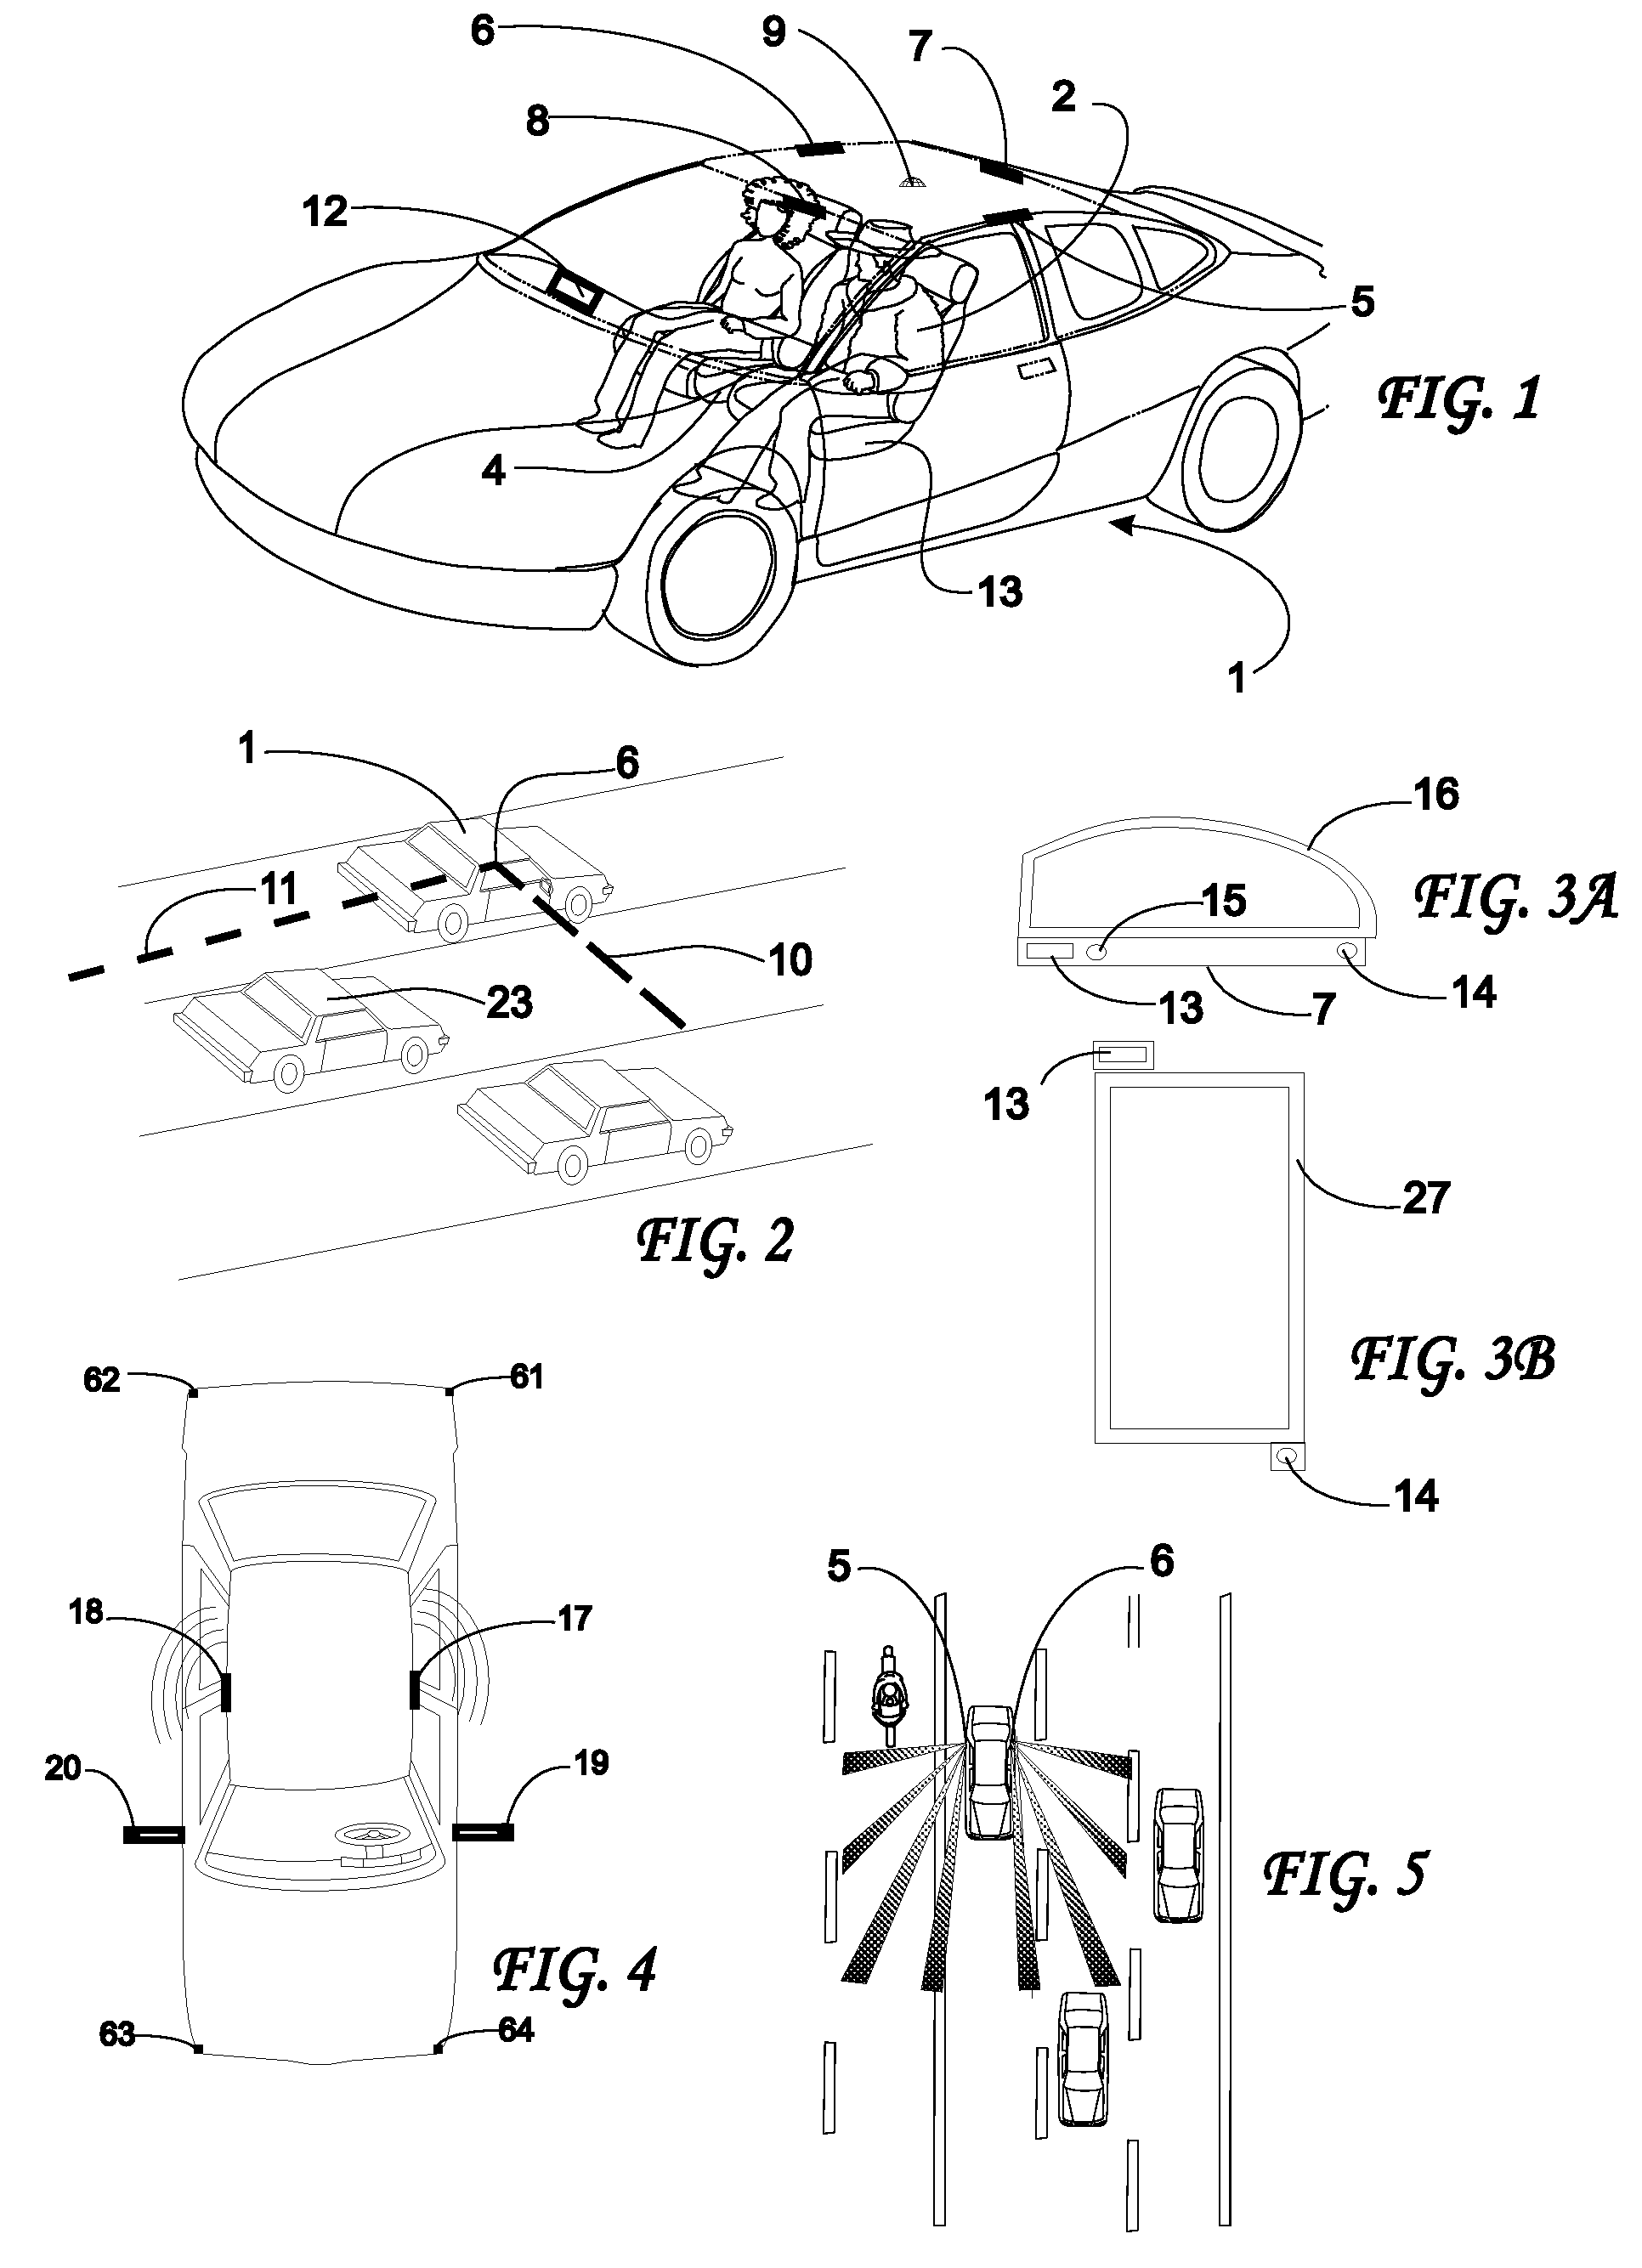 System and method for detecting and protecting pedestrians